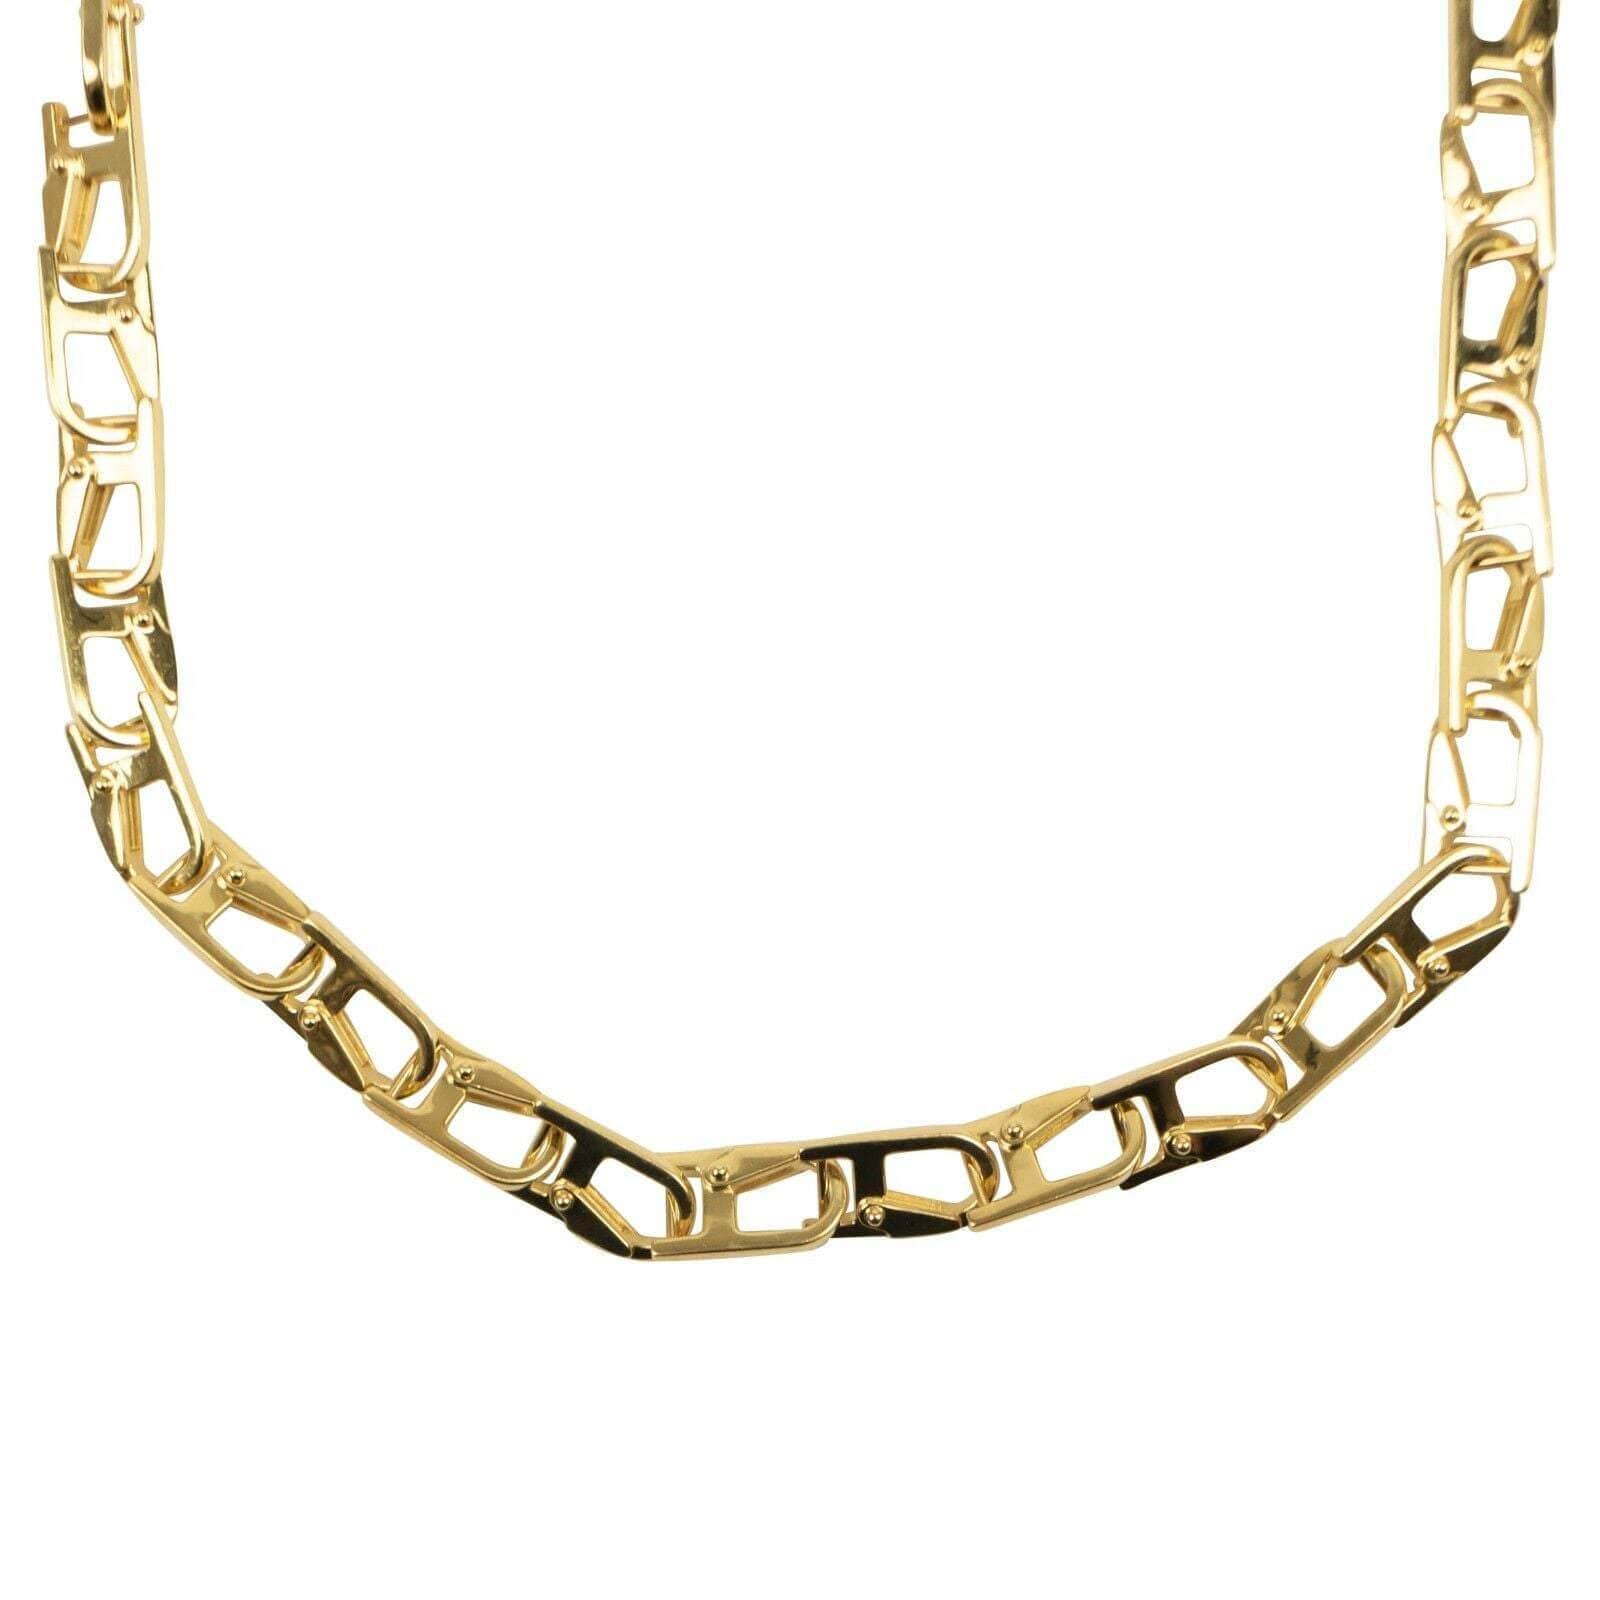 Ambush 1000-2000, ambush, channelenable-all, chicmi, couponcollection, gender-mens, main-accessories, mens-necklaces, mens-shoes, size-os OS Gold Metal Sling Snap Necklace 95-AMB-3011/OS 95-AMB-3011/OS